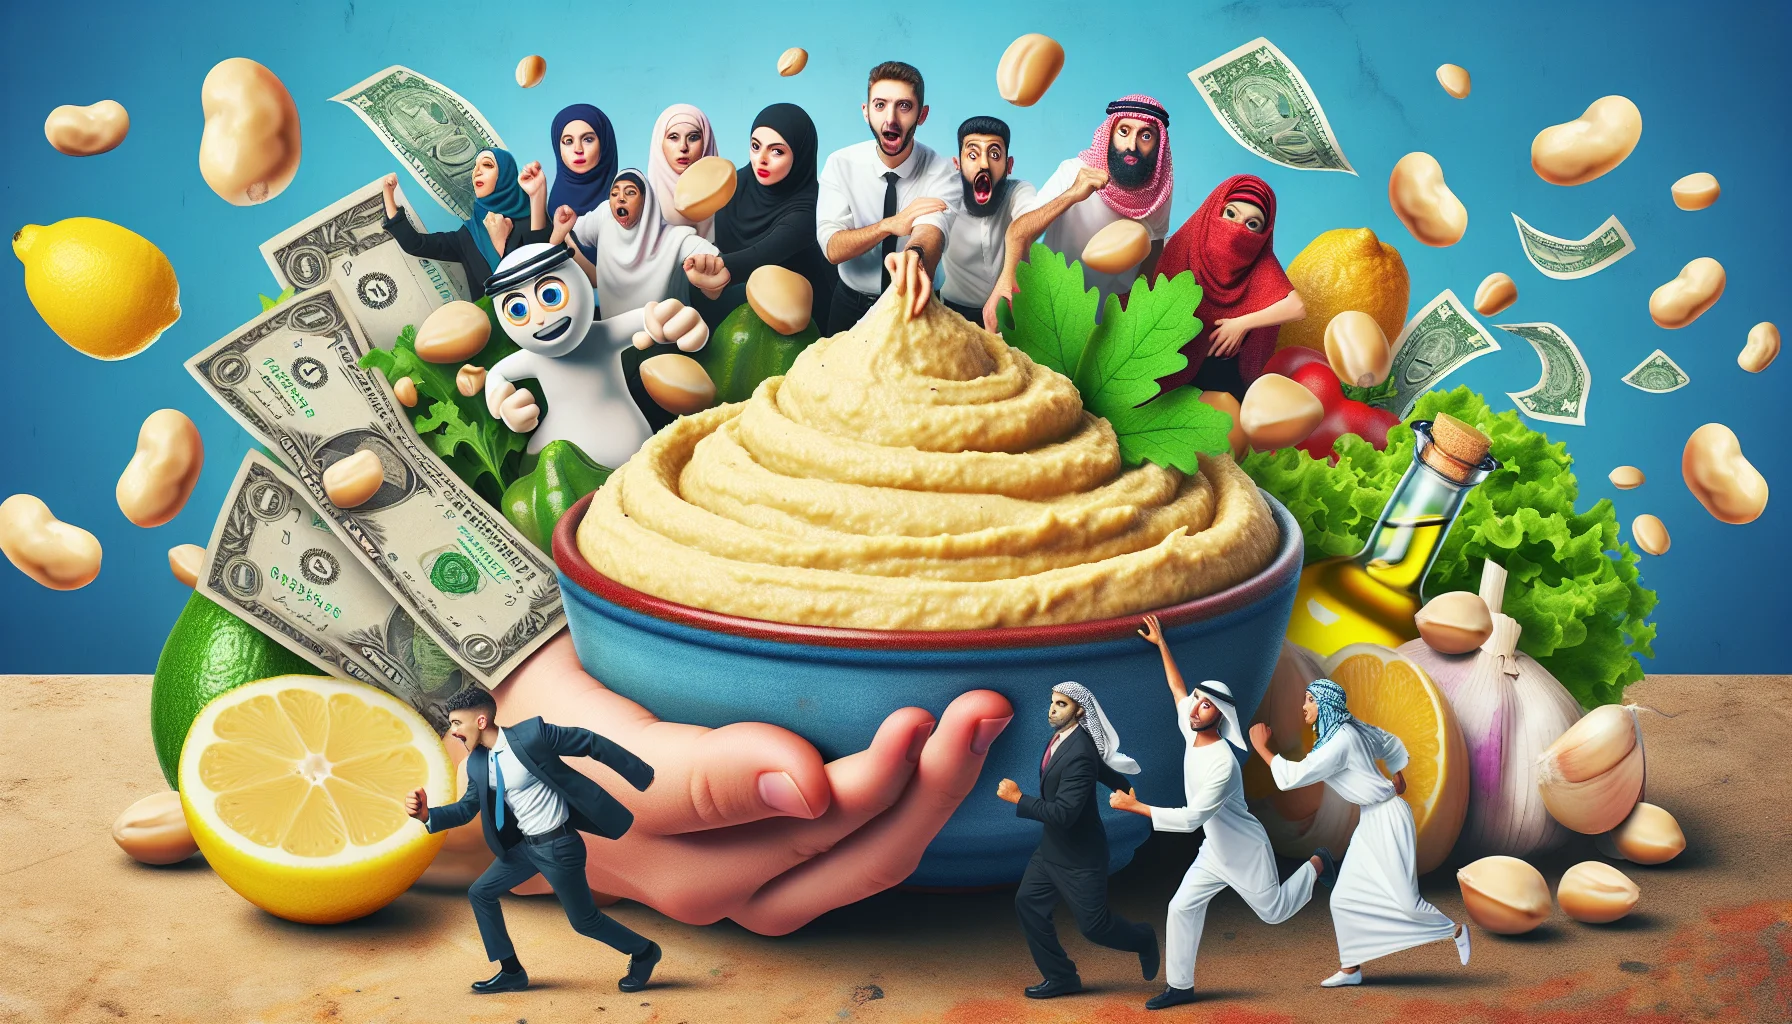 Create an amusing yet realistic image which presents a Palestinian hummus recipe in an engaging way. The image features a hefty bowl filled with creamy hummus, also vividly portraying ingredients such as chickpeas, lemon, garlic, and olive oil. In the background, a group of diverse individuals representing various descents such as Caucasian, Middle-Eastern, Hispanic and South Asian are shown. They try to grab chickpeas turned into funny cartoon characters, running around with dollar bills and salad leaves, indicating that eating healthy can be inexpensive. The scene captures the fun and budget-friendly aspect of healthy eating.